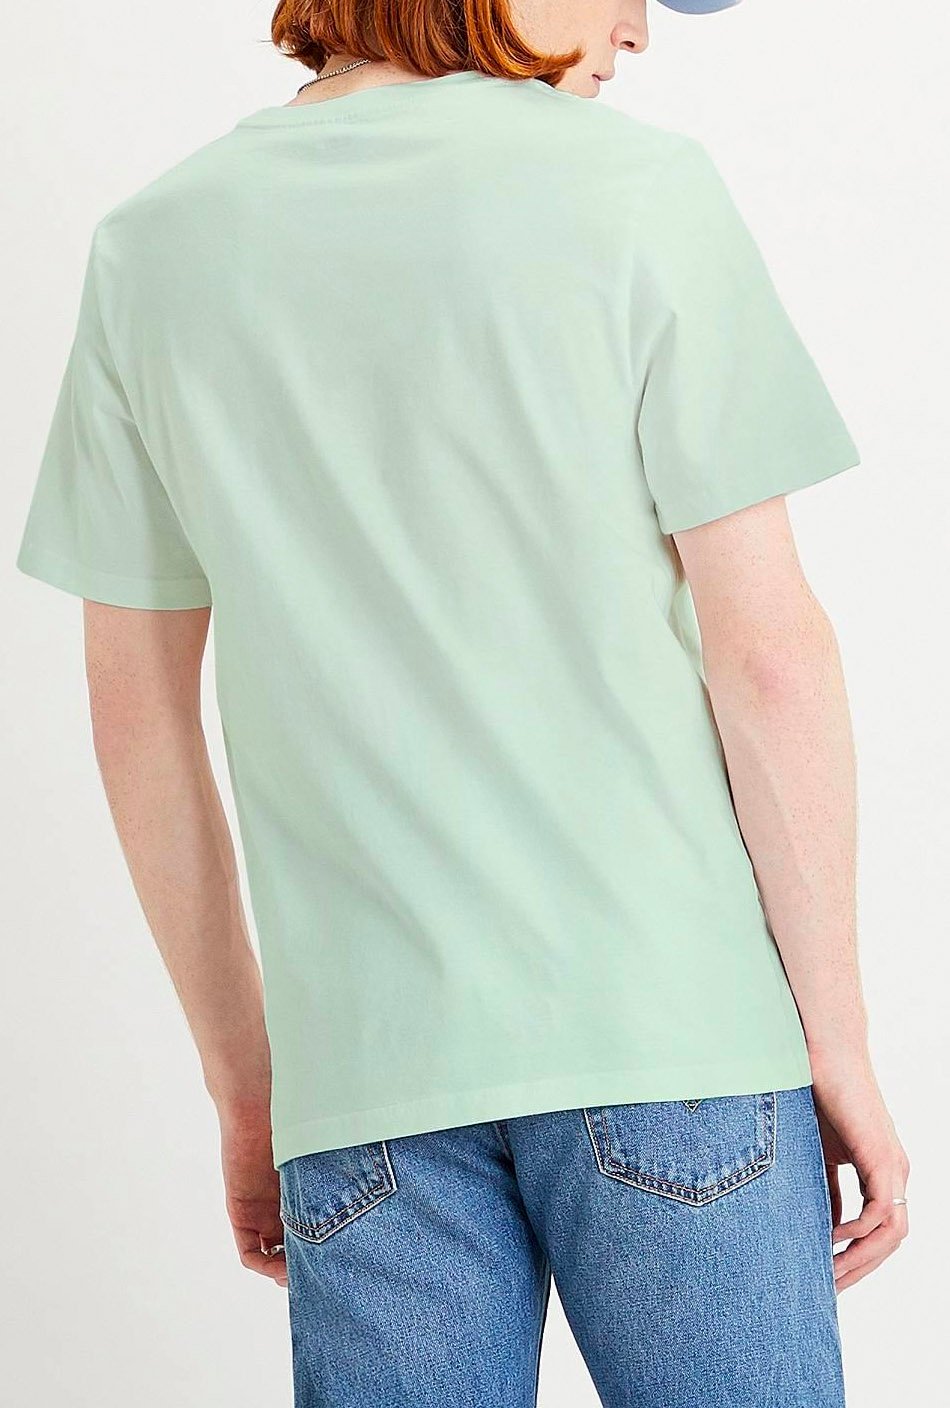 Levi's Relaxed Fit Seriff Puff t-shirt